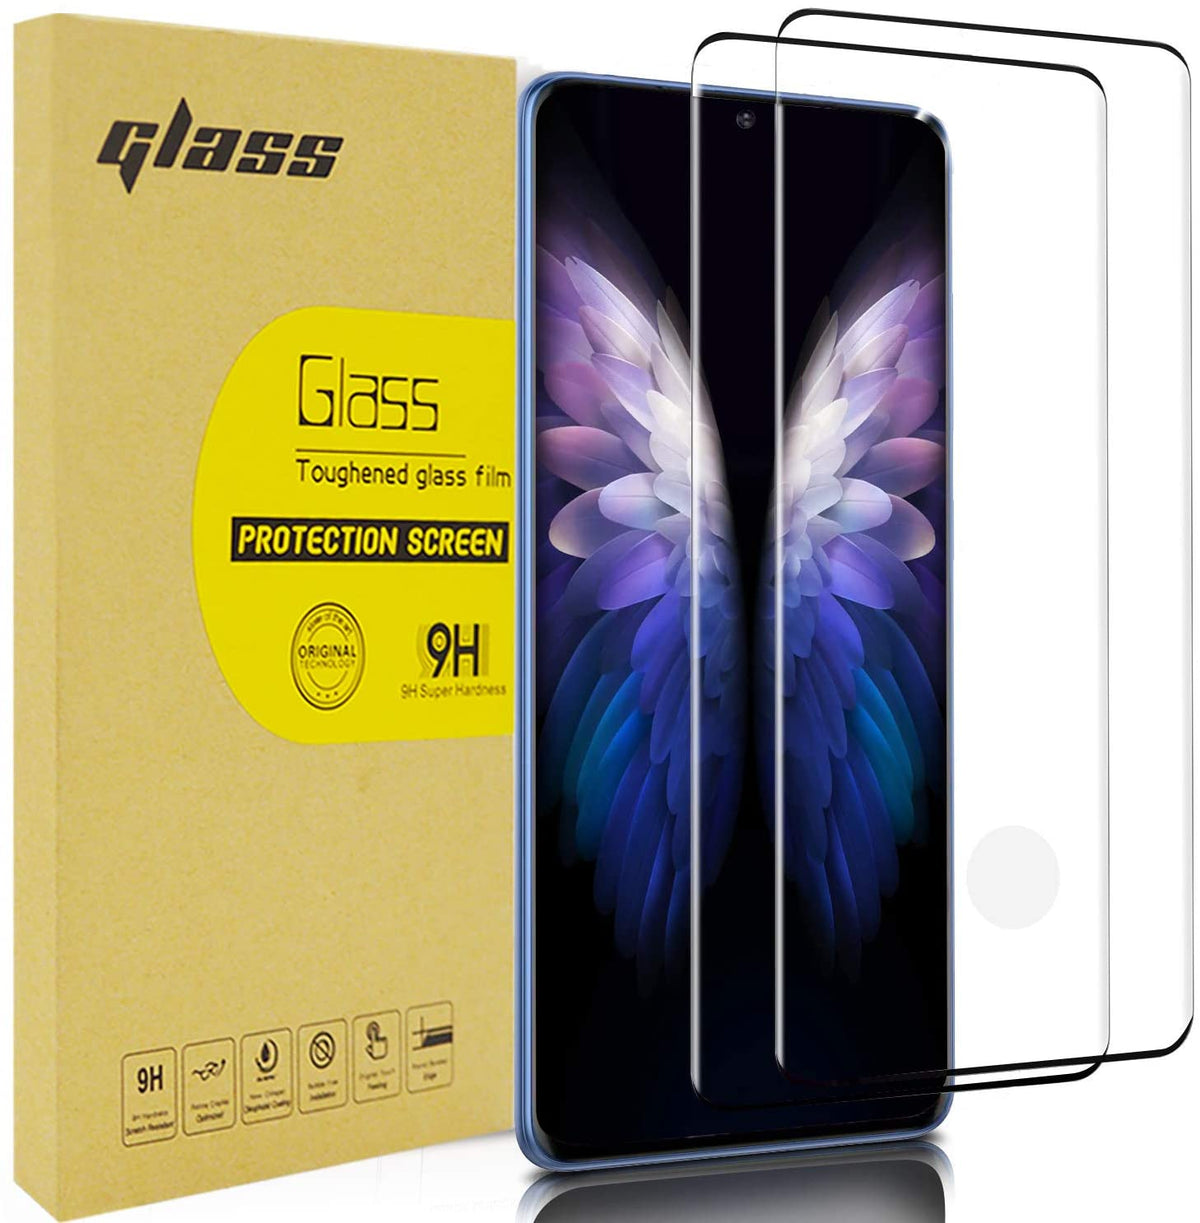 Samsung A51 Tempered Glass Screen Protector